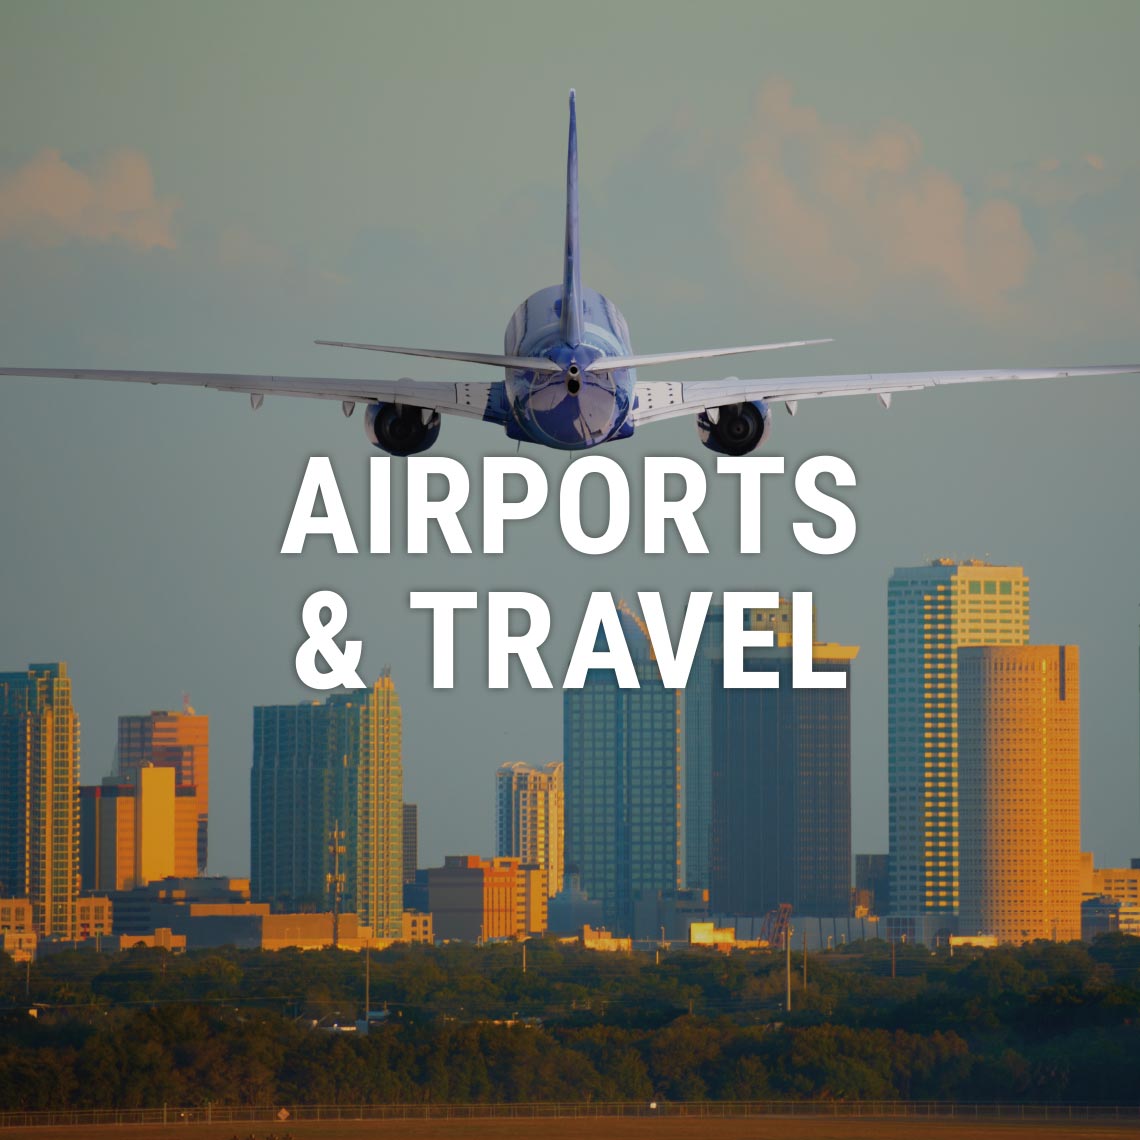 Airports & Travel